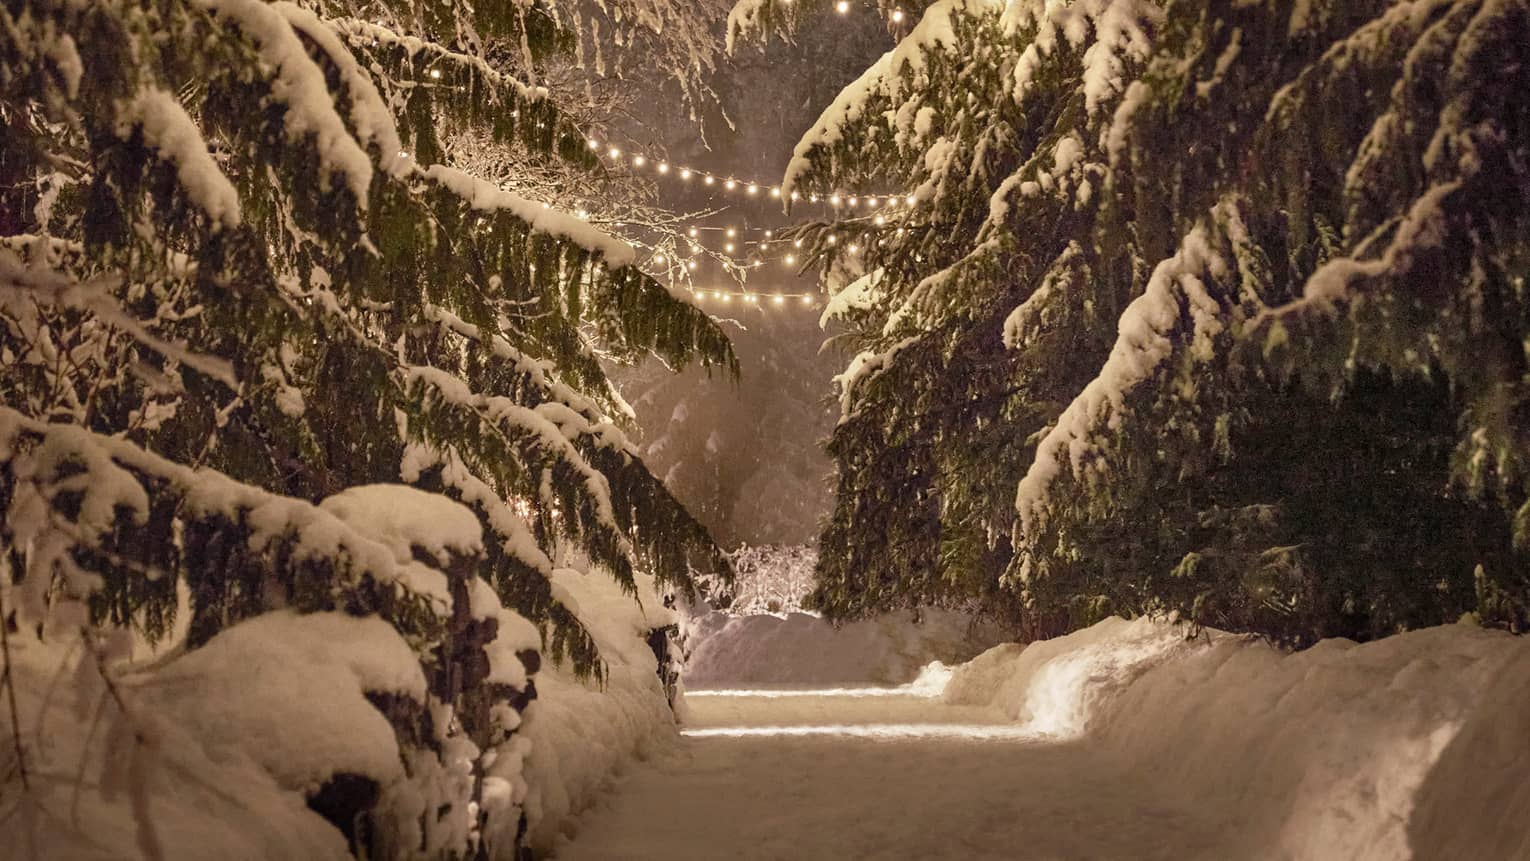 String lights illuminate a snow-covered path surrounded by trees